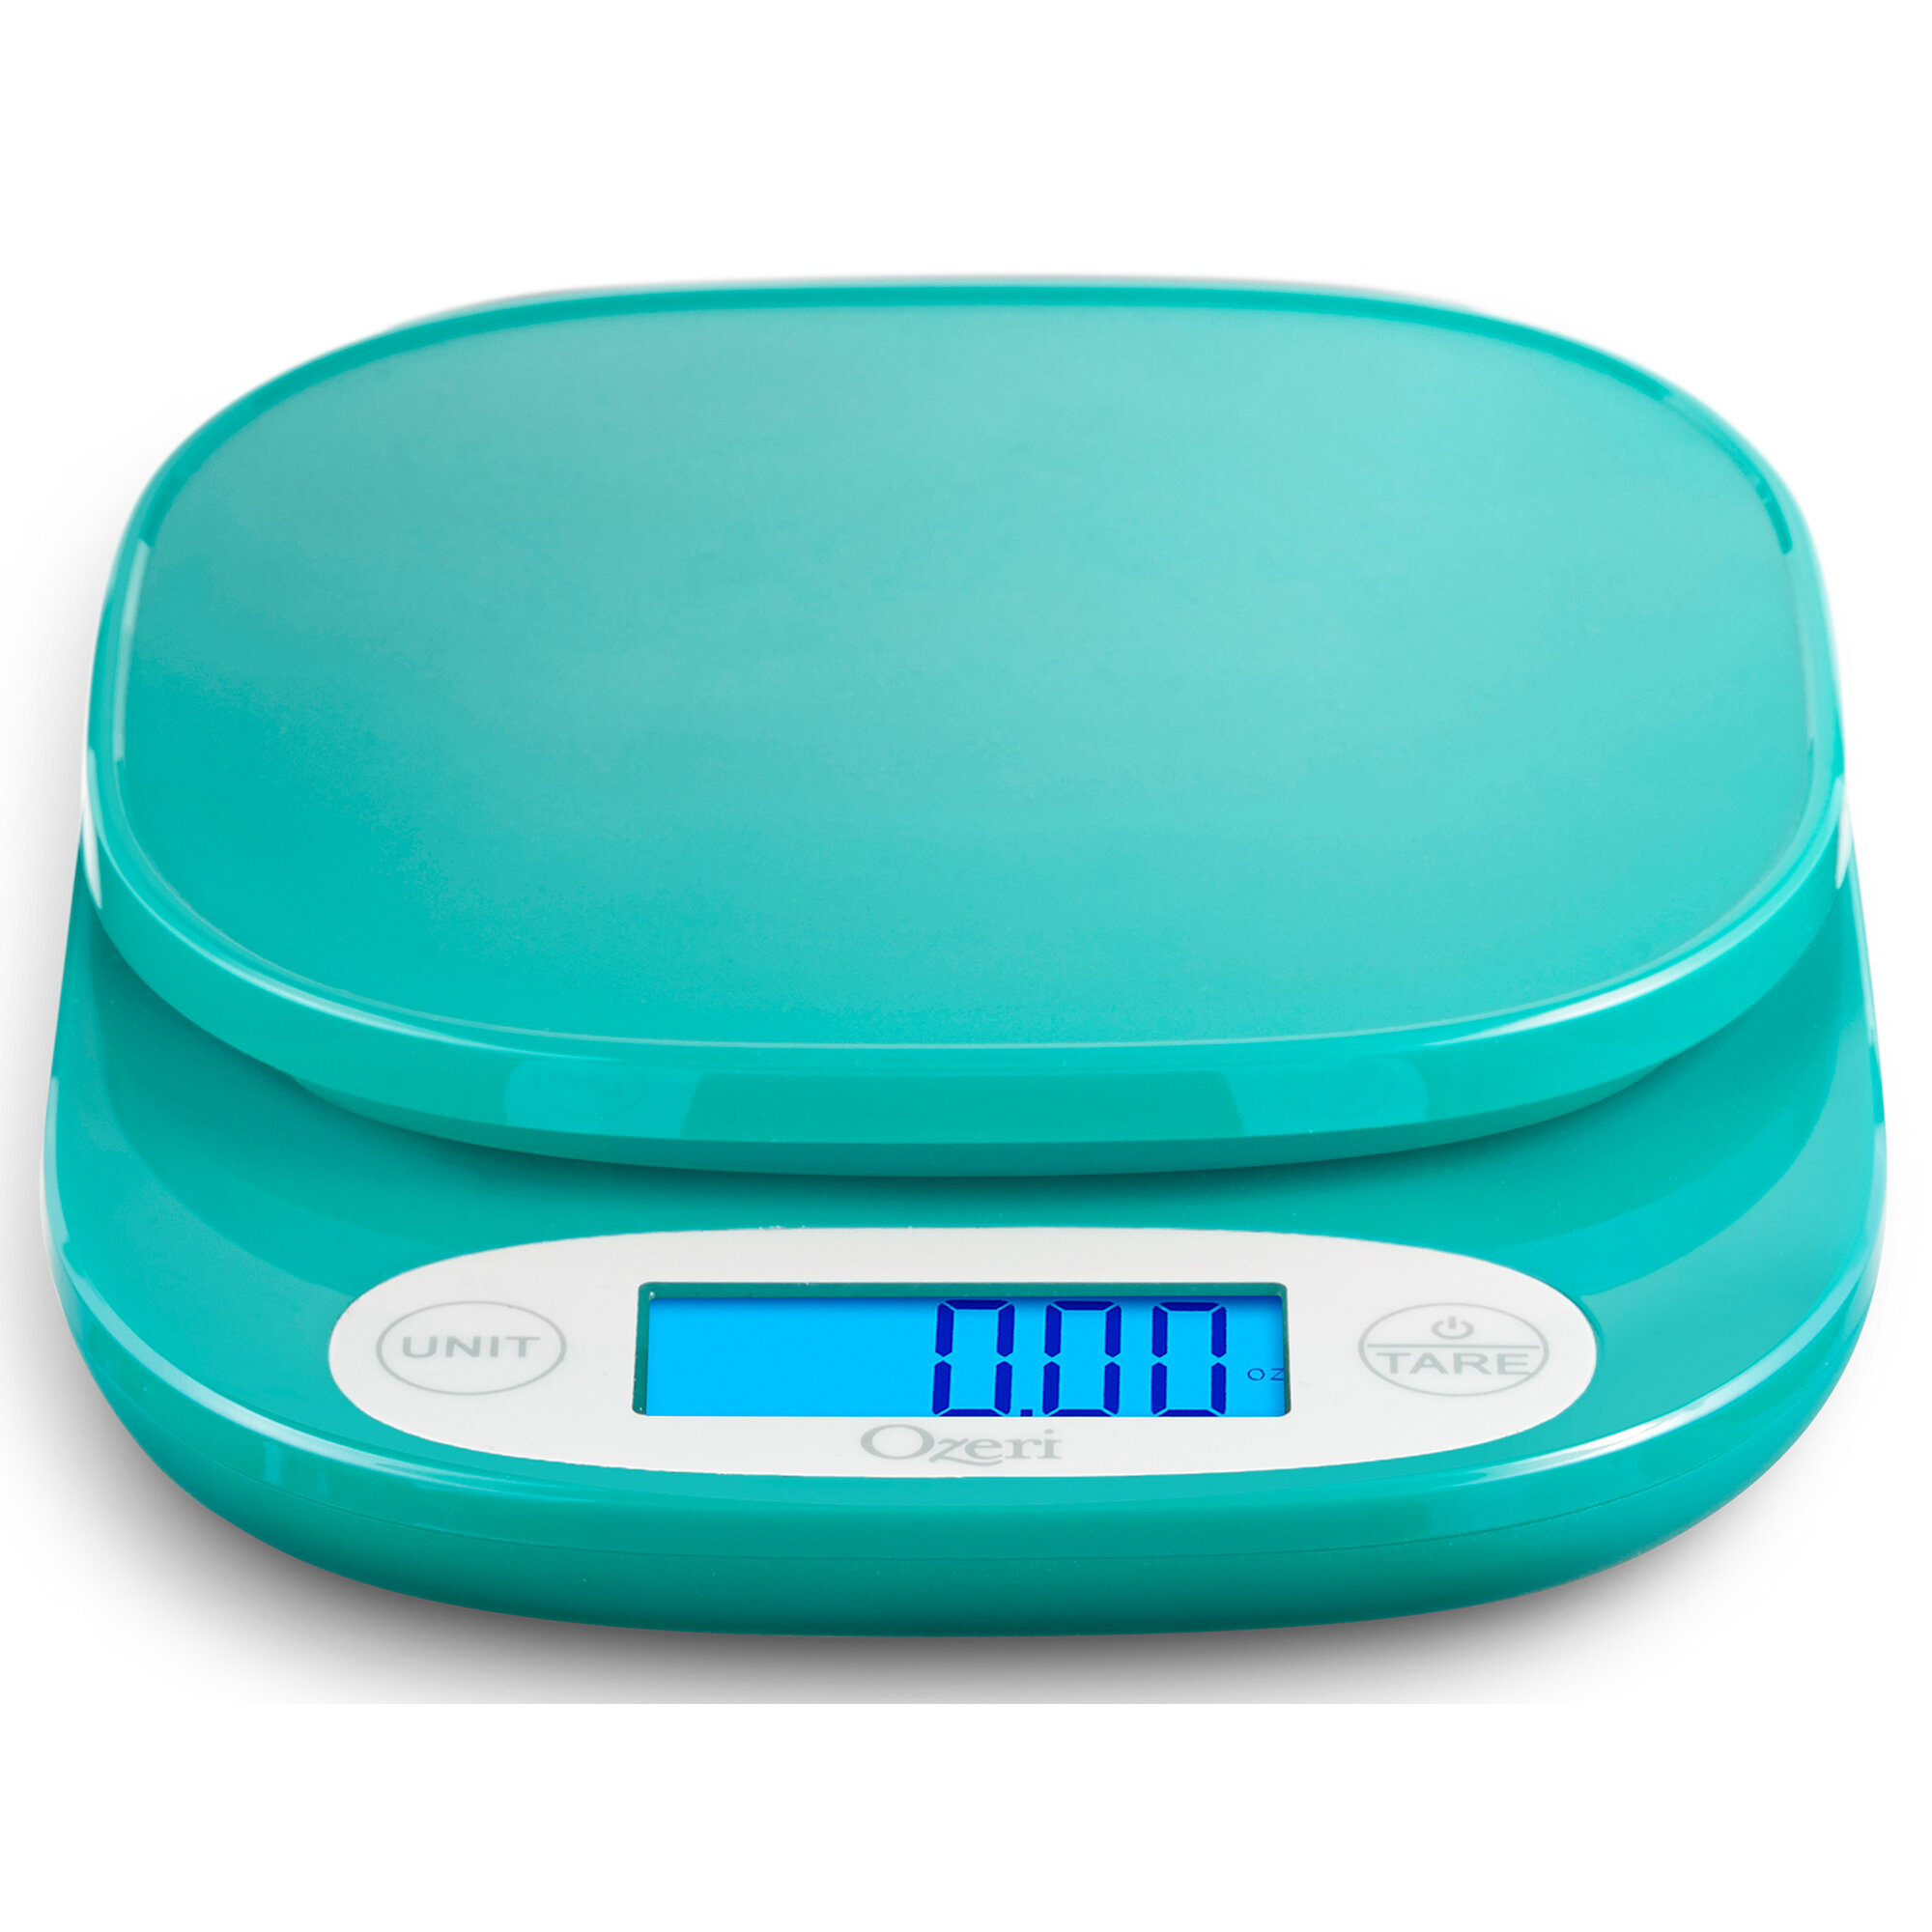 precision weight scale